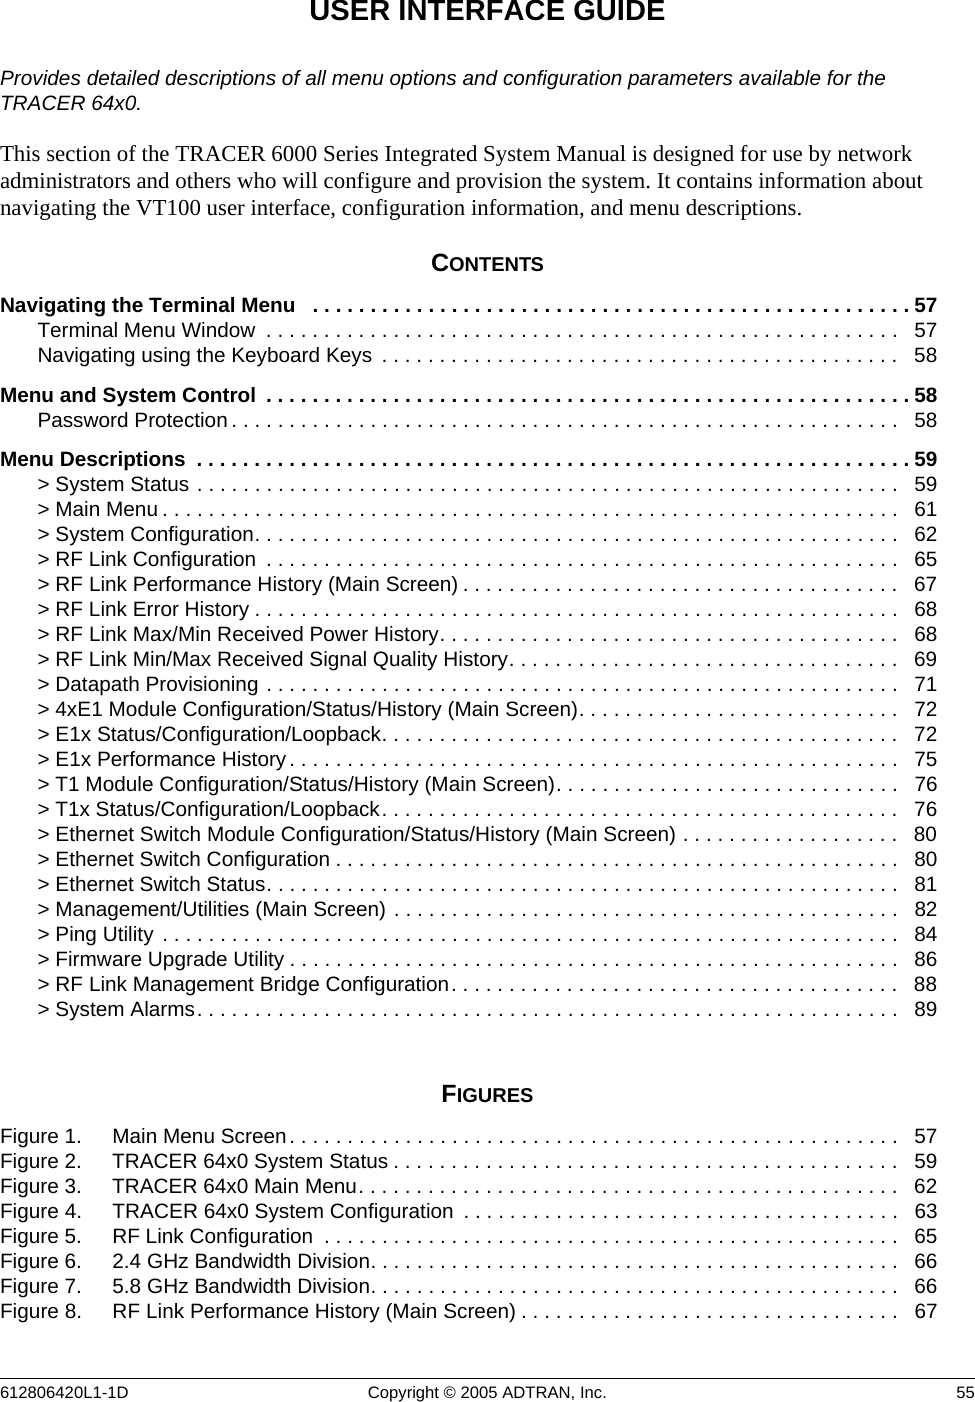 612806420L1-1D Copyright © 2005 ADTRAN, Inc.  55USER INTERFACE GUIDEProvides detailed descriptions of all menu options and configuration parameters available for the TRACER 64x0.This section of the TRACER 6000 Series Integrated System Manual is designed for use by network administrators and others who will configure and provision the system. It contains information about navigating the VT100 user interface, configuration information, and menu descriptions.CONTENTSNavigating the Terminal Menu   . . . . . . . . . . . . . . . . . . . . . . . . . . . . . . . . . . . . . . . . . . . . . . . . . . . . 57Terminal Menu Window  . . . . . . . . . . . . . . . . . . . . . . . . . . . . . . . . . . . . . . . . . . . . . . . . . . . . . . .   57Navigating using the Keyboard Keys  . . . . . . . . . . . . . . . . . . . . . . . . . . . . . . . . . . . . . . . . . . . . .   58Menu and System Control  . . . . . . . . . . . . . . . . . . . . . . . . . . . . . . . . . . . . . . . . . . . . . . . . . . . . . . . . 58Password Protection . . . . . . . . . . . . . . . . . . . . . . . . . . . . . . . . . . . . . . . . . . . . . . . . . . . . . . . . . .   58Menu Descriptions  . . . . . . . . . . . . . . . . . . . . . . . . . . . . . . . . . . . . . . . . . . . . . . . . . . . . . . . . . . . . . . 59&gt; System Status . . . . . . . . . . . . . . . . . . . . . . . . . . . . . . . . . . . . . . . . . . . . . . . . . . . . . . . . . . . . .   59&gt; Main Menu . . . . . . . . . . . . . . . . . . . . . . . . . . . . . . . . . . . . . . . . . . . . . . . . . . . . . . . . . . . . . . . .   61&gt; System Configuration. . . . . . . . . . . . . . . . . . . . . . . . . . . . . . . . . . . . . . . . . . . . . . . . . . . . . . . .   62&gt; RF Link Configuration  . . . . . . . . . . . . . . . . . . . . . . . . . . . . . . . . . . . . . . . . . . . . . . . . . . . . . . .   65&gt; RF Link Performance History (Main Screen) . . . . . . . . . . . . . . . . . . . . . . . . . . . . . . . . . . . . . .   67&gt; RF Link Error History . . . . . . . . . . . . . . . . . . . . . . . . . . . . . . . . . . . . . . . . . . . . . . . . . . . . . . . .   68&gt; RF Link Max/Min Received Power History. . . . . . . . . . . . . . . . . . . . . . . . . . . . . . . . . . . . . . . .   68&gt; RF Link Min/Max Received Signal Quality History. . . . . . . . . . . . . . . . . . . . . . . . . . . . . . . . . .   69&gt; Datapath Provisioning . . . . . . . . . . . . . . . . . . . . . . . . . . . . . . . . . . . . . . . . . . . . . . . . . . . . . . .   71&gt; 4xE1 Module Configuration/Status/History (Main Screen). . . . . . . . . . . . . . . . . . . . . . . . . . . .   72&gt; E1x Status/Configuration/Loopback. . . . . . . . . . . . . . . . . . . . . . . . . . . . . . . . . . . . . . . . . . . . .   72&gt; E1x Performance History . . . . . . . . . . . . . . . . . . . . . . . . . . . . . . . . . . . . . . . . . . . . . . . . . . . . .   75&gt; T1 Module Configuration/Status/History (Main Screen). . . . . . . . . . . . . . . . . . . . . . . . . . . . . .   76&gt; T1x Status/Configuration/Loopback. . . . . . . . . . . . . . . . . . . . . . . . . . . . . . . . . . . . . . . . . . . . .   76&gt; Ethernet Switch Module Configuration/Status/History (Main Screen) . . . . . . . . . . . . . . . . . . .   80&gt; Ethernet Switch Configuration . . . . . . . . . . . . . . . . . . . . . . . . . . . . . . . . . . . . . . . . . . . . . . . . .  80&gt; Ethernet Switch Status. . . . . . . . . . . . . . . . . . . . . . . . . . . . . . . . . . . . . . . . . . . . . . . . . . . . . . .   81&gt; Management/Utilities (Main Screen) . . . . . . . . . . . . . . . . . . . . . . . . . . . . . . . . . . . . . . . . . . . .   82&gt; Ping Utility . . . . . . . . . . . . . . . . . . . . . . . . . . . . . . . . . . . . . . . . . . . . . . . . . . . . . . . . . . . . . . . .   84&gt; Firmware Upgrade Utility . . . . . . . . . . . . . . . . . . . . . . . . . . . . . . . . . . . . . . . . . . . . . . . . . . . . .   86&gt; RF Link Management Bridge Configuration. . . . . . . . . . . . . . . . . . . . . . . . . . . . . . . . . . . . . . .   88&gt; System Alarms. . . . . . . . . . . . . . . . . . . . . . . . . . . . . . . . . . . . . . . . . . . . . . . . . . . . . . . . . . . . .   89FIGURESFigure 1. Main Menu Screen. . . . . . . . . . . . . . . . . . . . . . . . . . . . . . . . . . . . . . . . . . . . . . . . . . . . .   57Figure 2. TRACER 64x0 System Status . . . . . . . . . . . . . . . . . . . . . . . . . . . . . . . . . . . . . . . . . . . .   59Figure 3. TRACER 64x0 Main Menu. . . . . . . . . . . . . . . . . . . . . . . . . . . . . . . . . . . . . . . . . . . . . . .   62Figure 4. TRACER 64x0 System Configuration  . . . . . . . . . . . . . . . . . . . . . . . . . . . . . . . . . . . . . .   63Figure 5. RF Link Configuration  . . . . . . . . . . . . . . . . . . . . . . . . . . . . . . . . . . . . . . . . . . . . . . . . . .   65Figure 6. 2.4 GHz Bandwidth Division. . . . . . . . . . . . . . . . . . . . . . . . . . . . . . . . . . . . . . . . . . . . . .   66Figure 7. 5.8 GHz Bandwidth Division. . . . . . . . . . . . . . . . . . . . . . . . . . . . . . . . . . . . . . . . . . . . . .   66Figure 8. RF Link Performance History (Main Screen) . . . . . . . . . . . . . . . . . . . . . . . . . . . . . . . . .   67